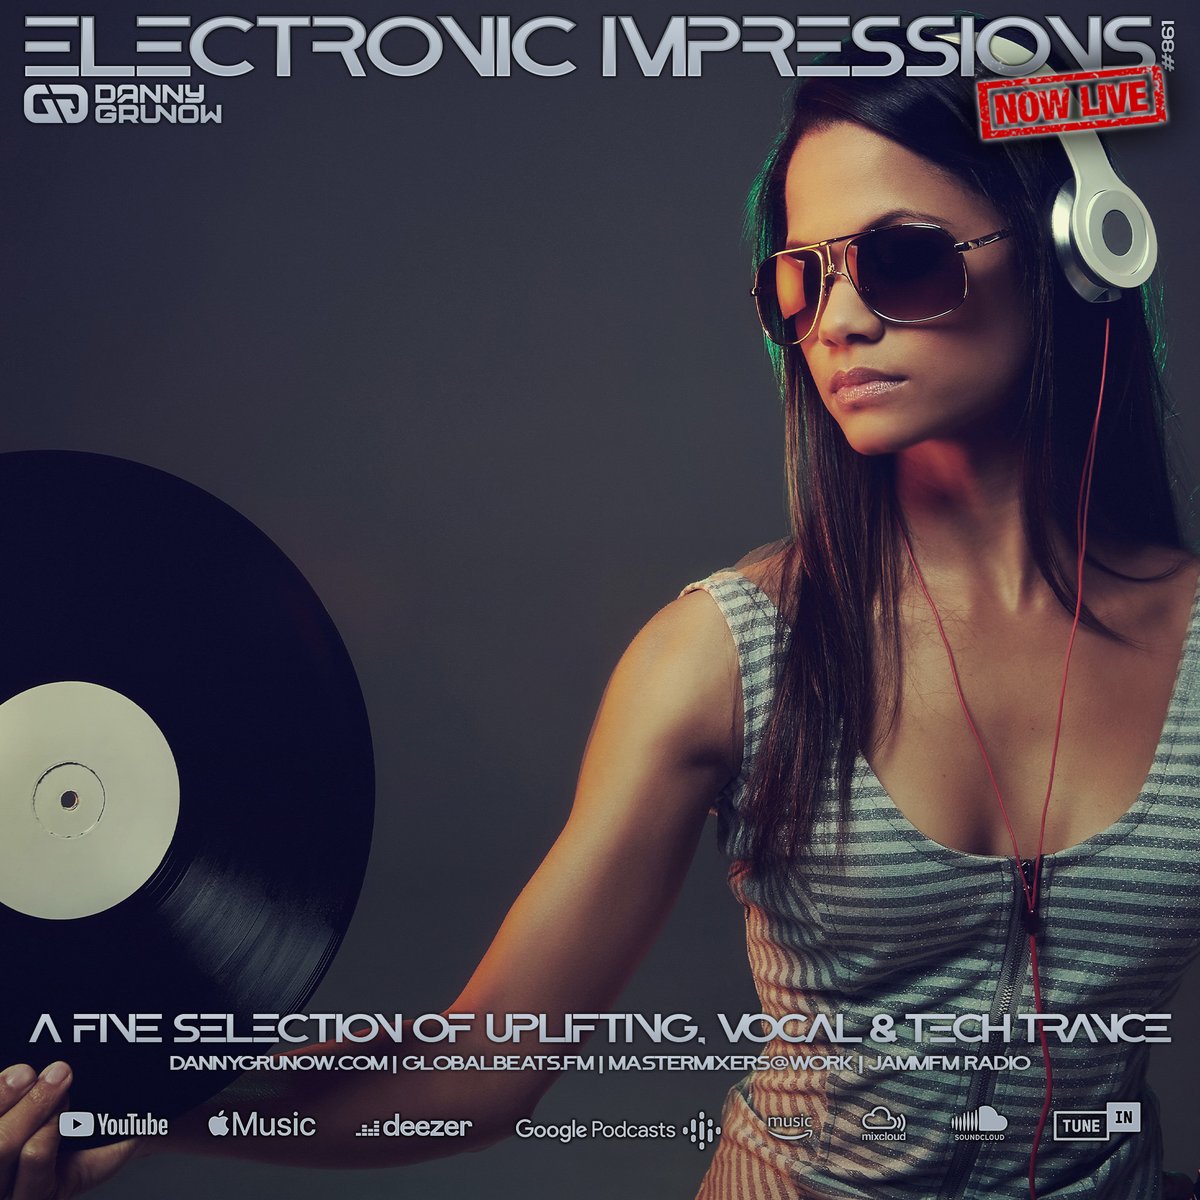 Now live #Trancelovers

Electronic Impressions 861 with Danny Grunow
youtu.be/Ob7Pg7hqomI

Tune in and enjoy the music.

#Trance #Trancefamily #UpliftingTrance #VocalTrance #TechTrance